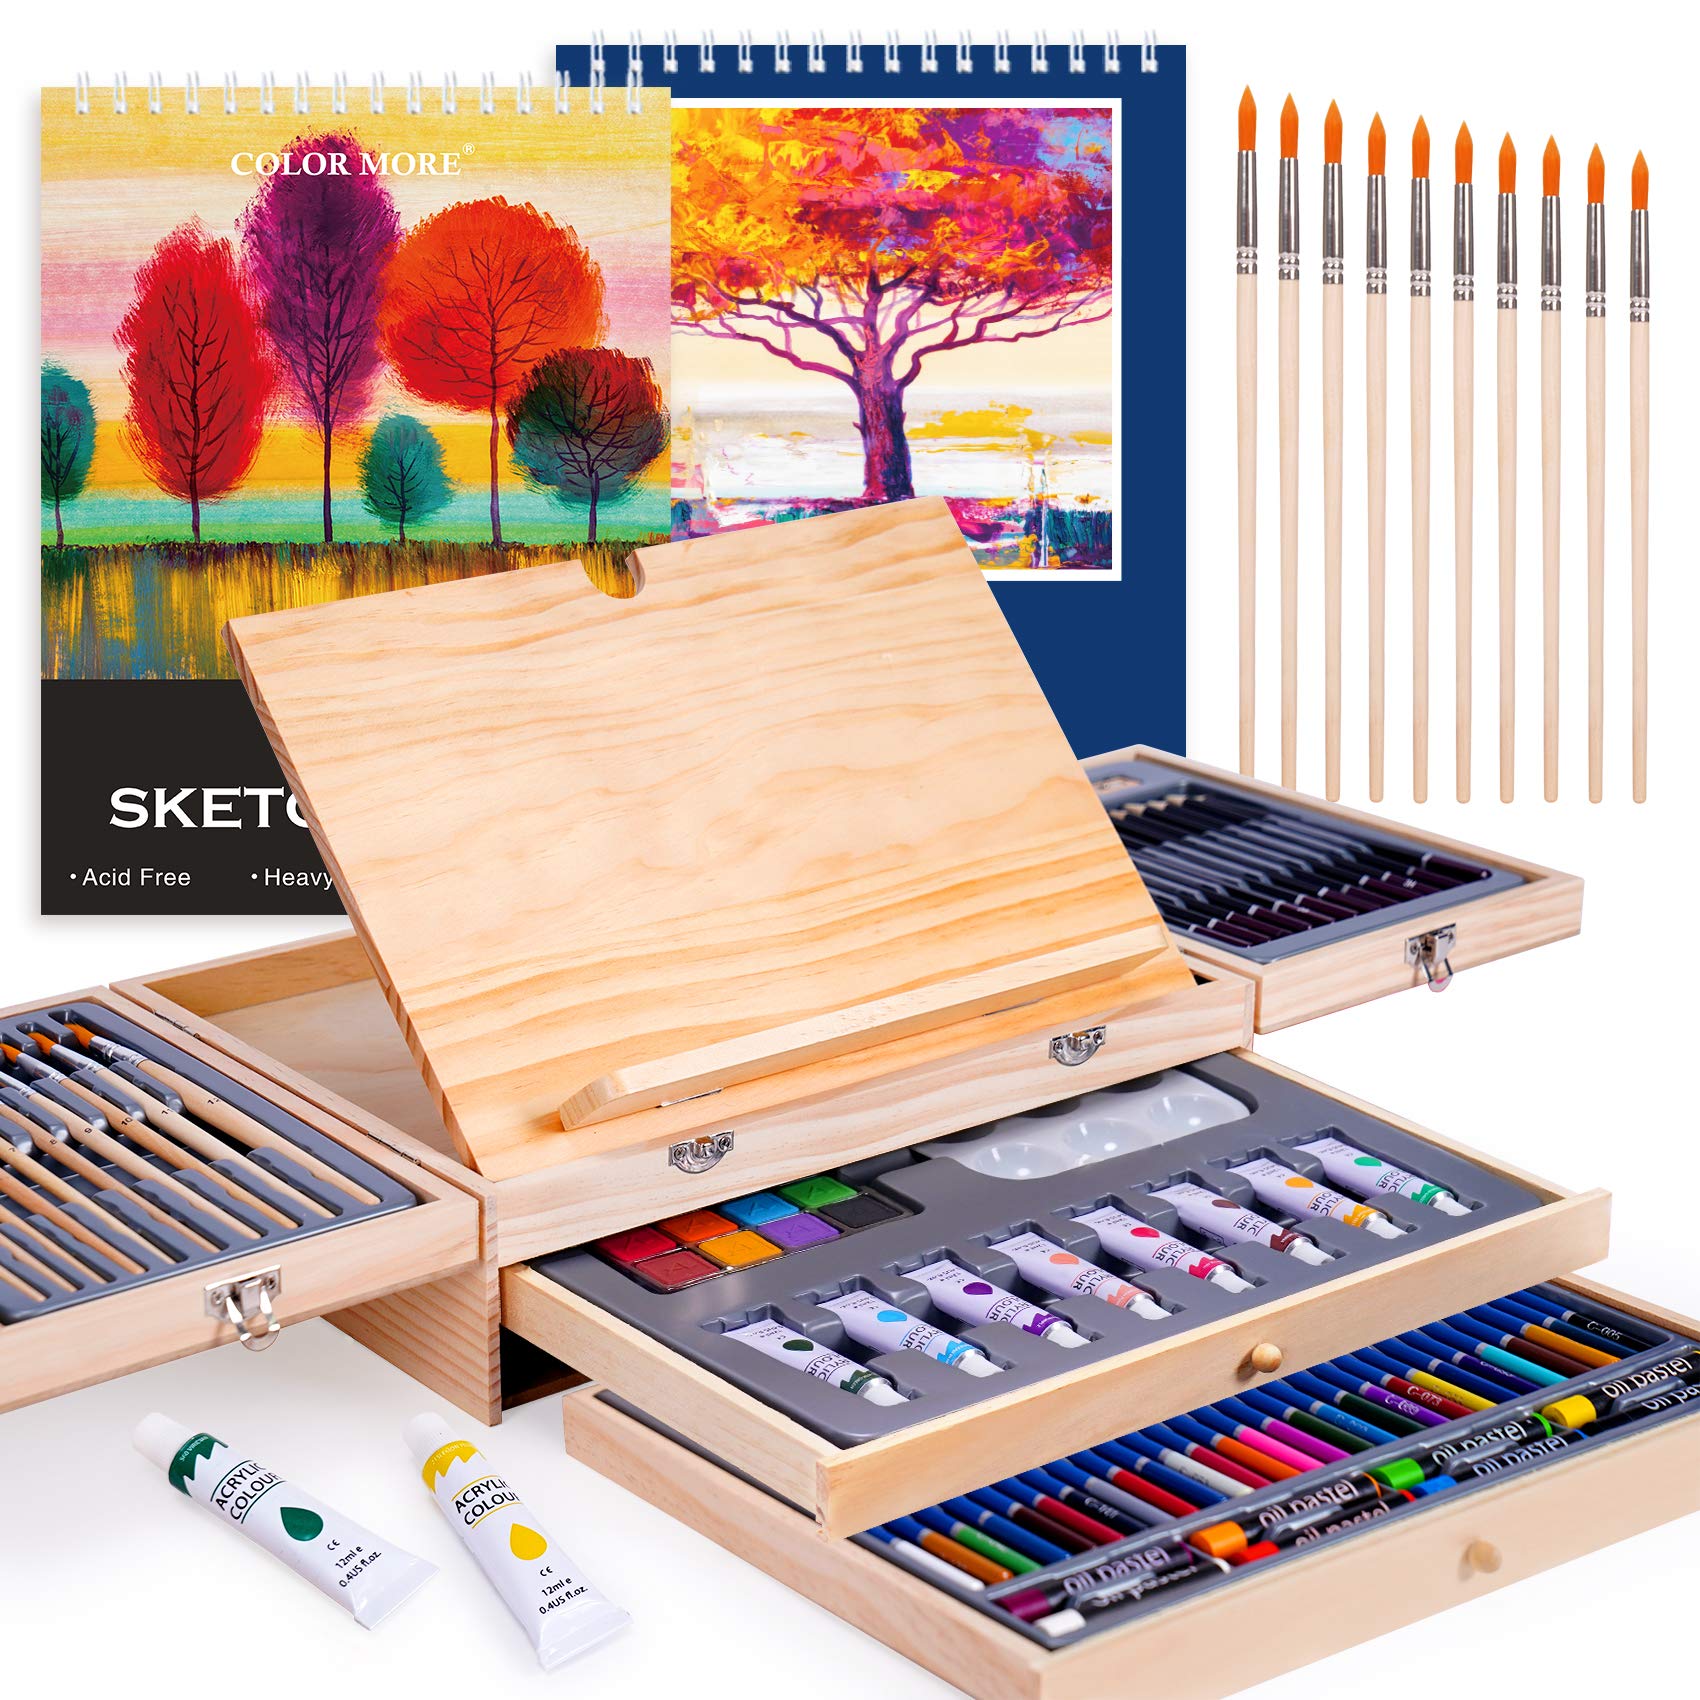 Paint Set 85 Piece Deluxe Wooden Art Set Crafts Drawing Painting